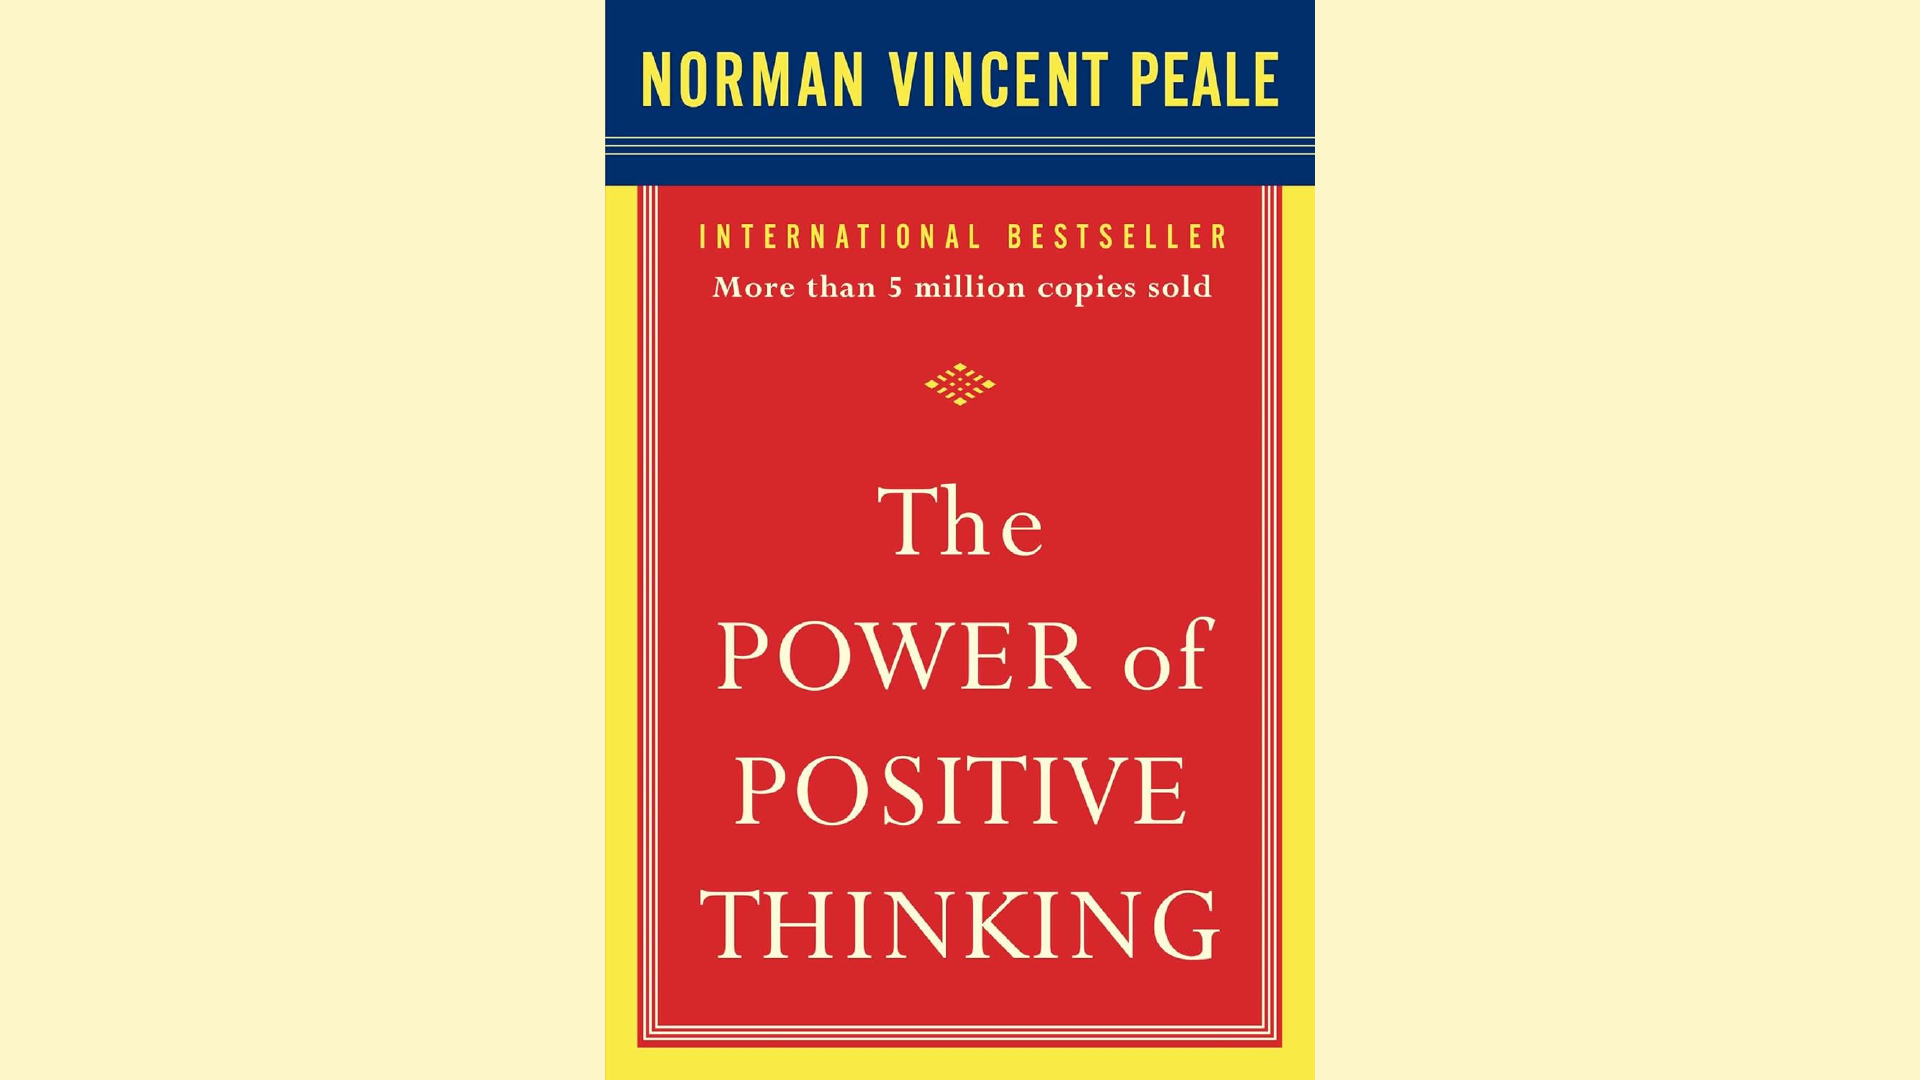 Summary: The Power of Positive Thinking by Norman Vincent Peale